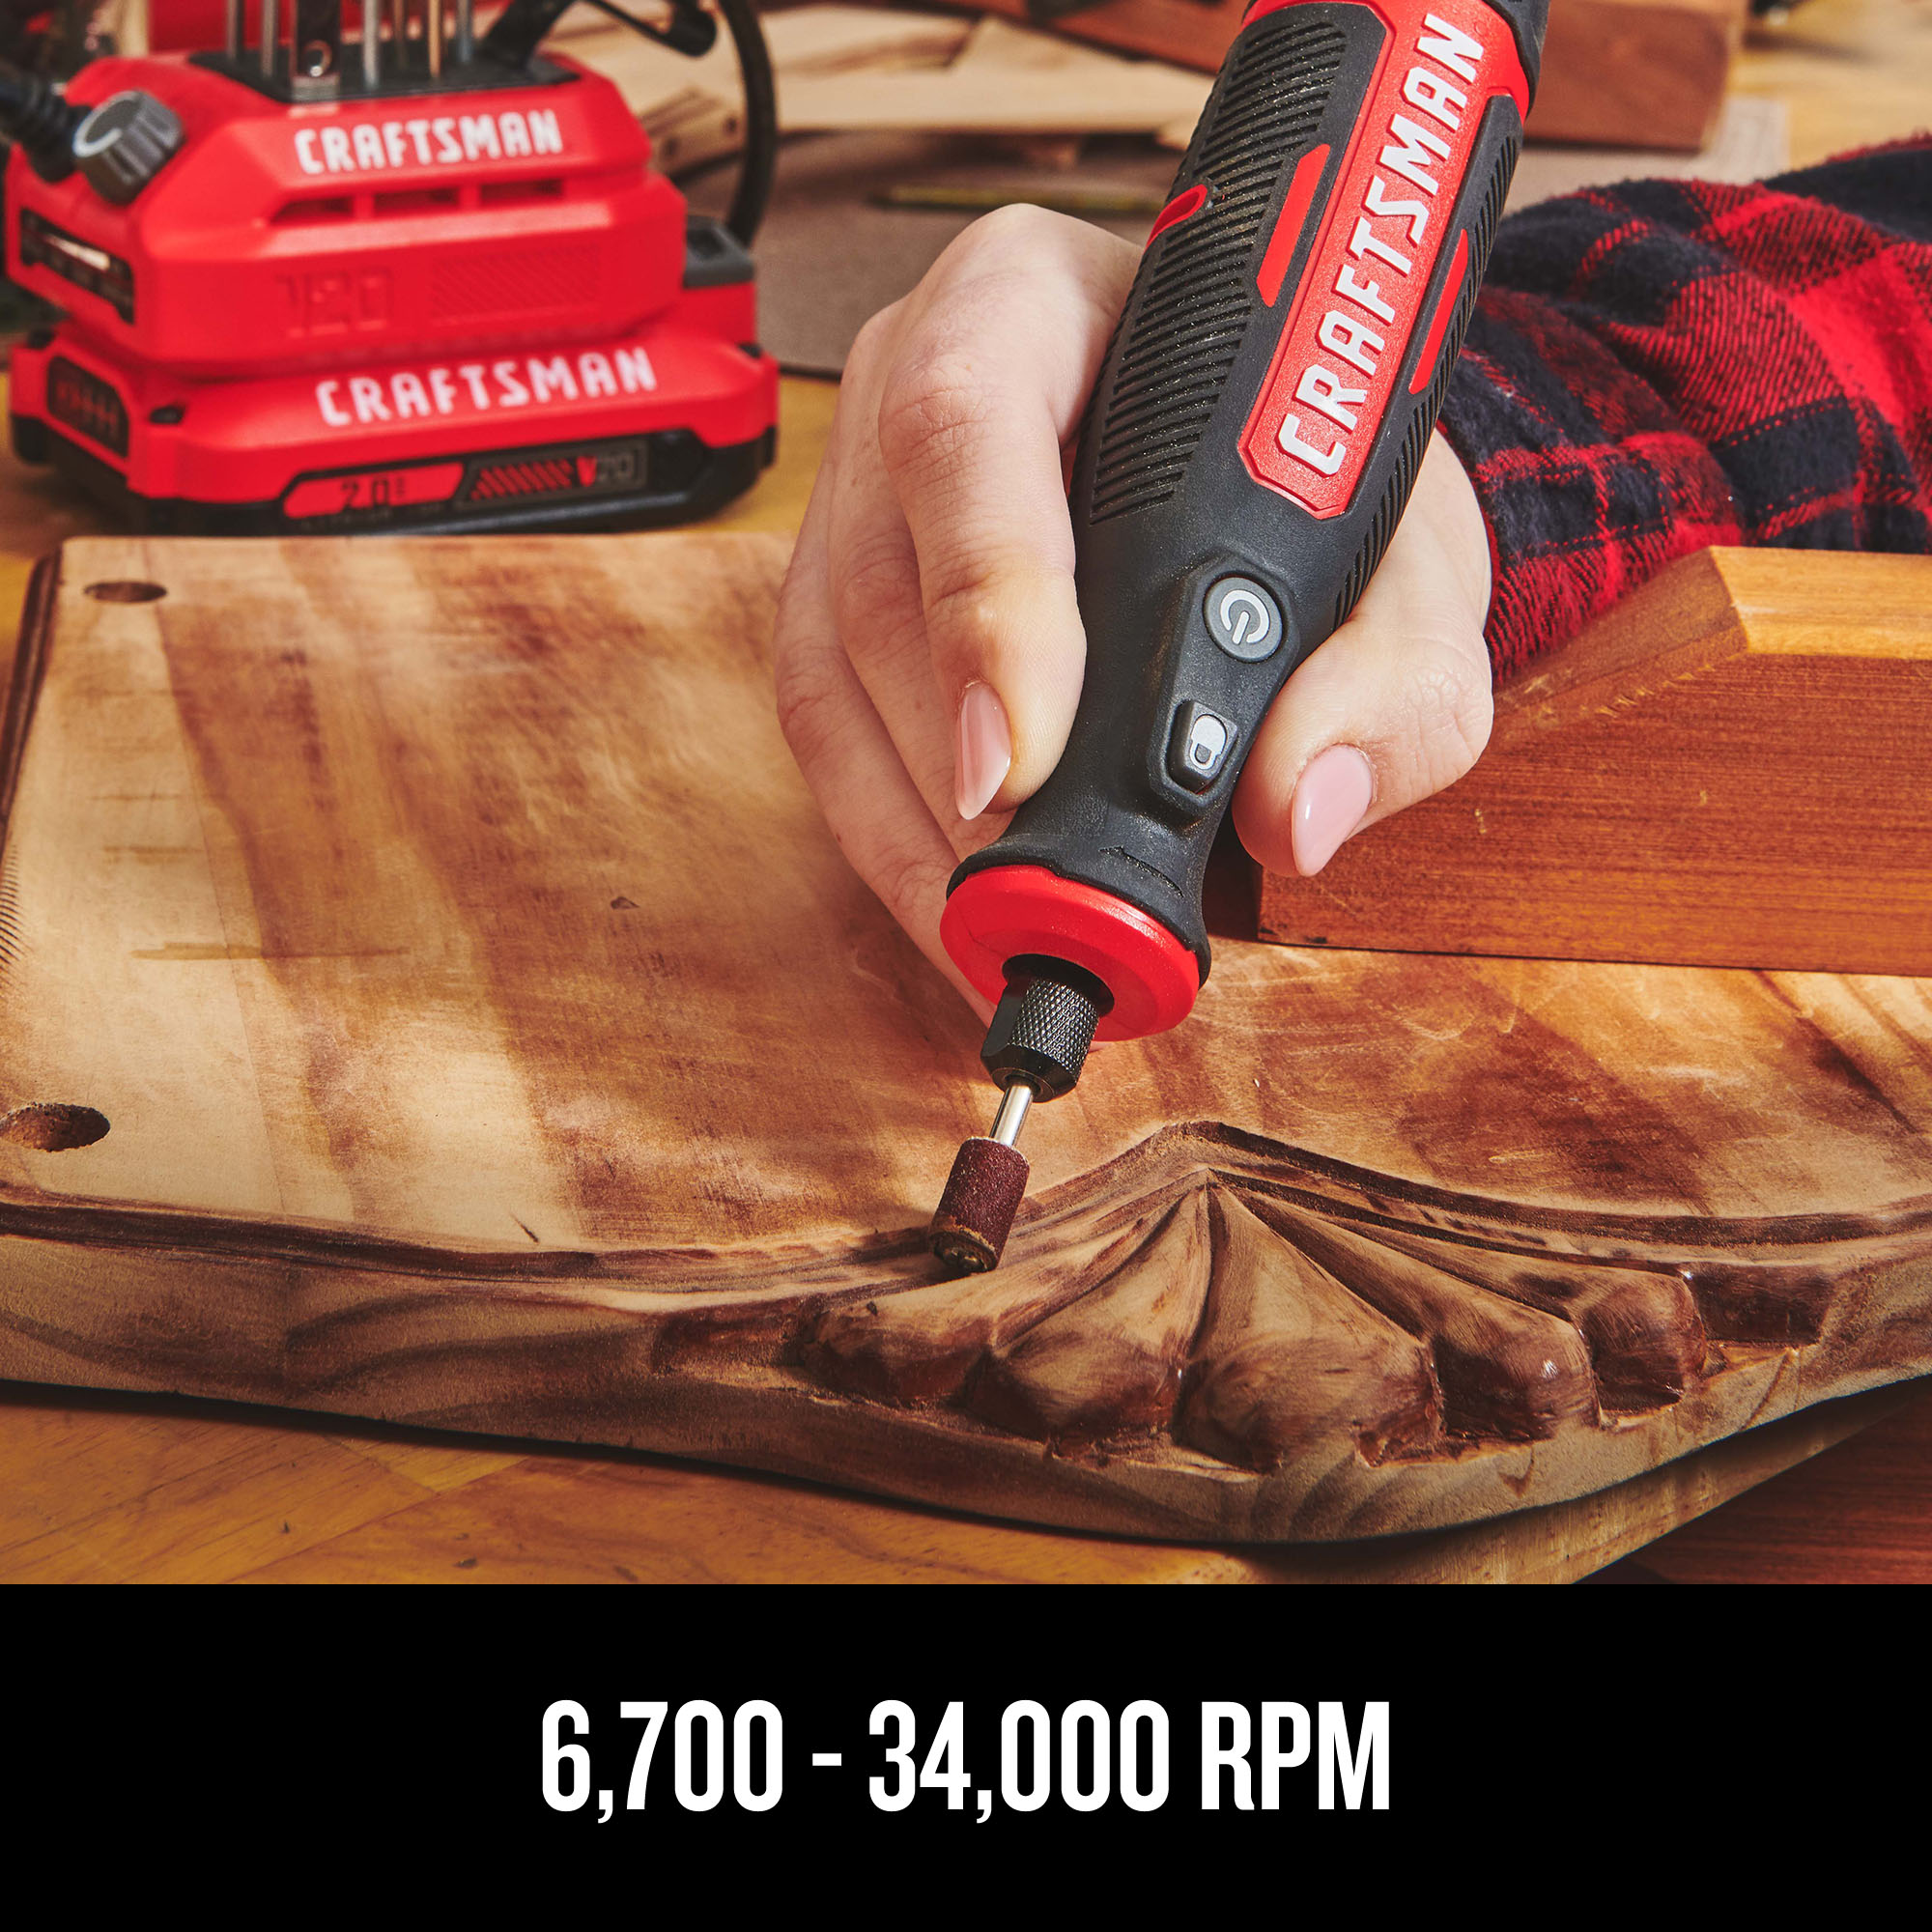 CRAFTSMAN Cordless 20-volt Max Multipurpose Rotary Tool in the Rotary department at Lowes.com